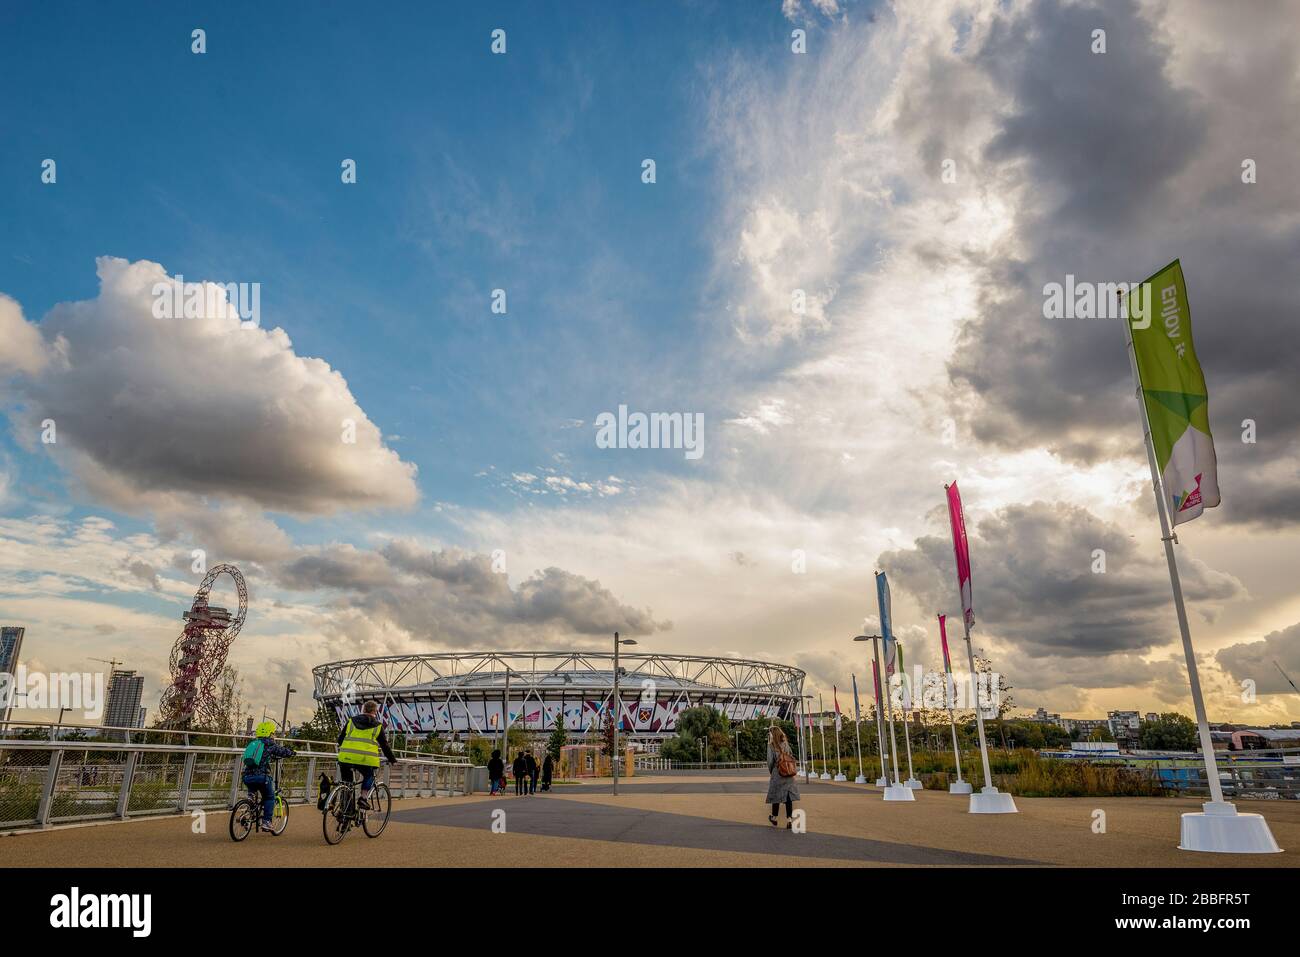 The sun sets over the 2012 Olympic stadium now home to football team West Ham United. People walk and cycle on the path that leads to the ground. Stock Photo